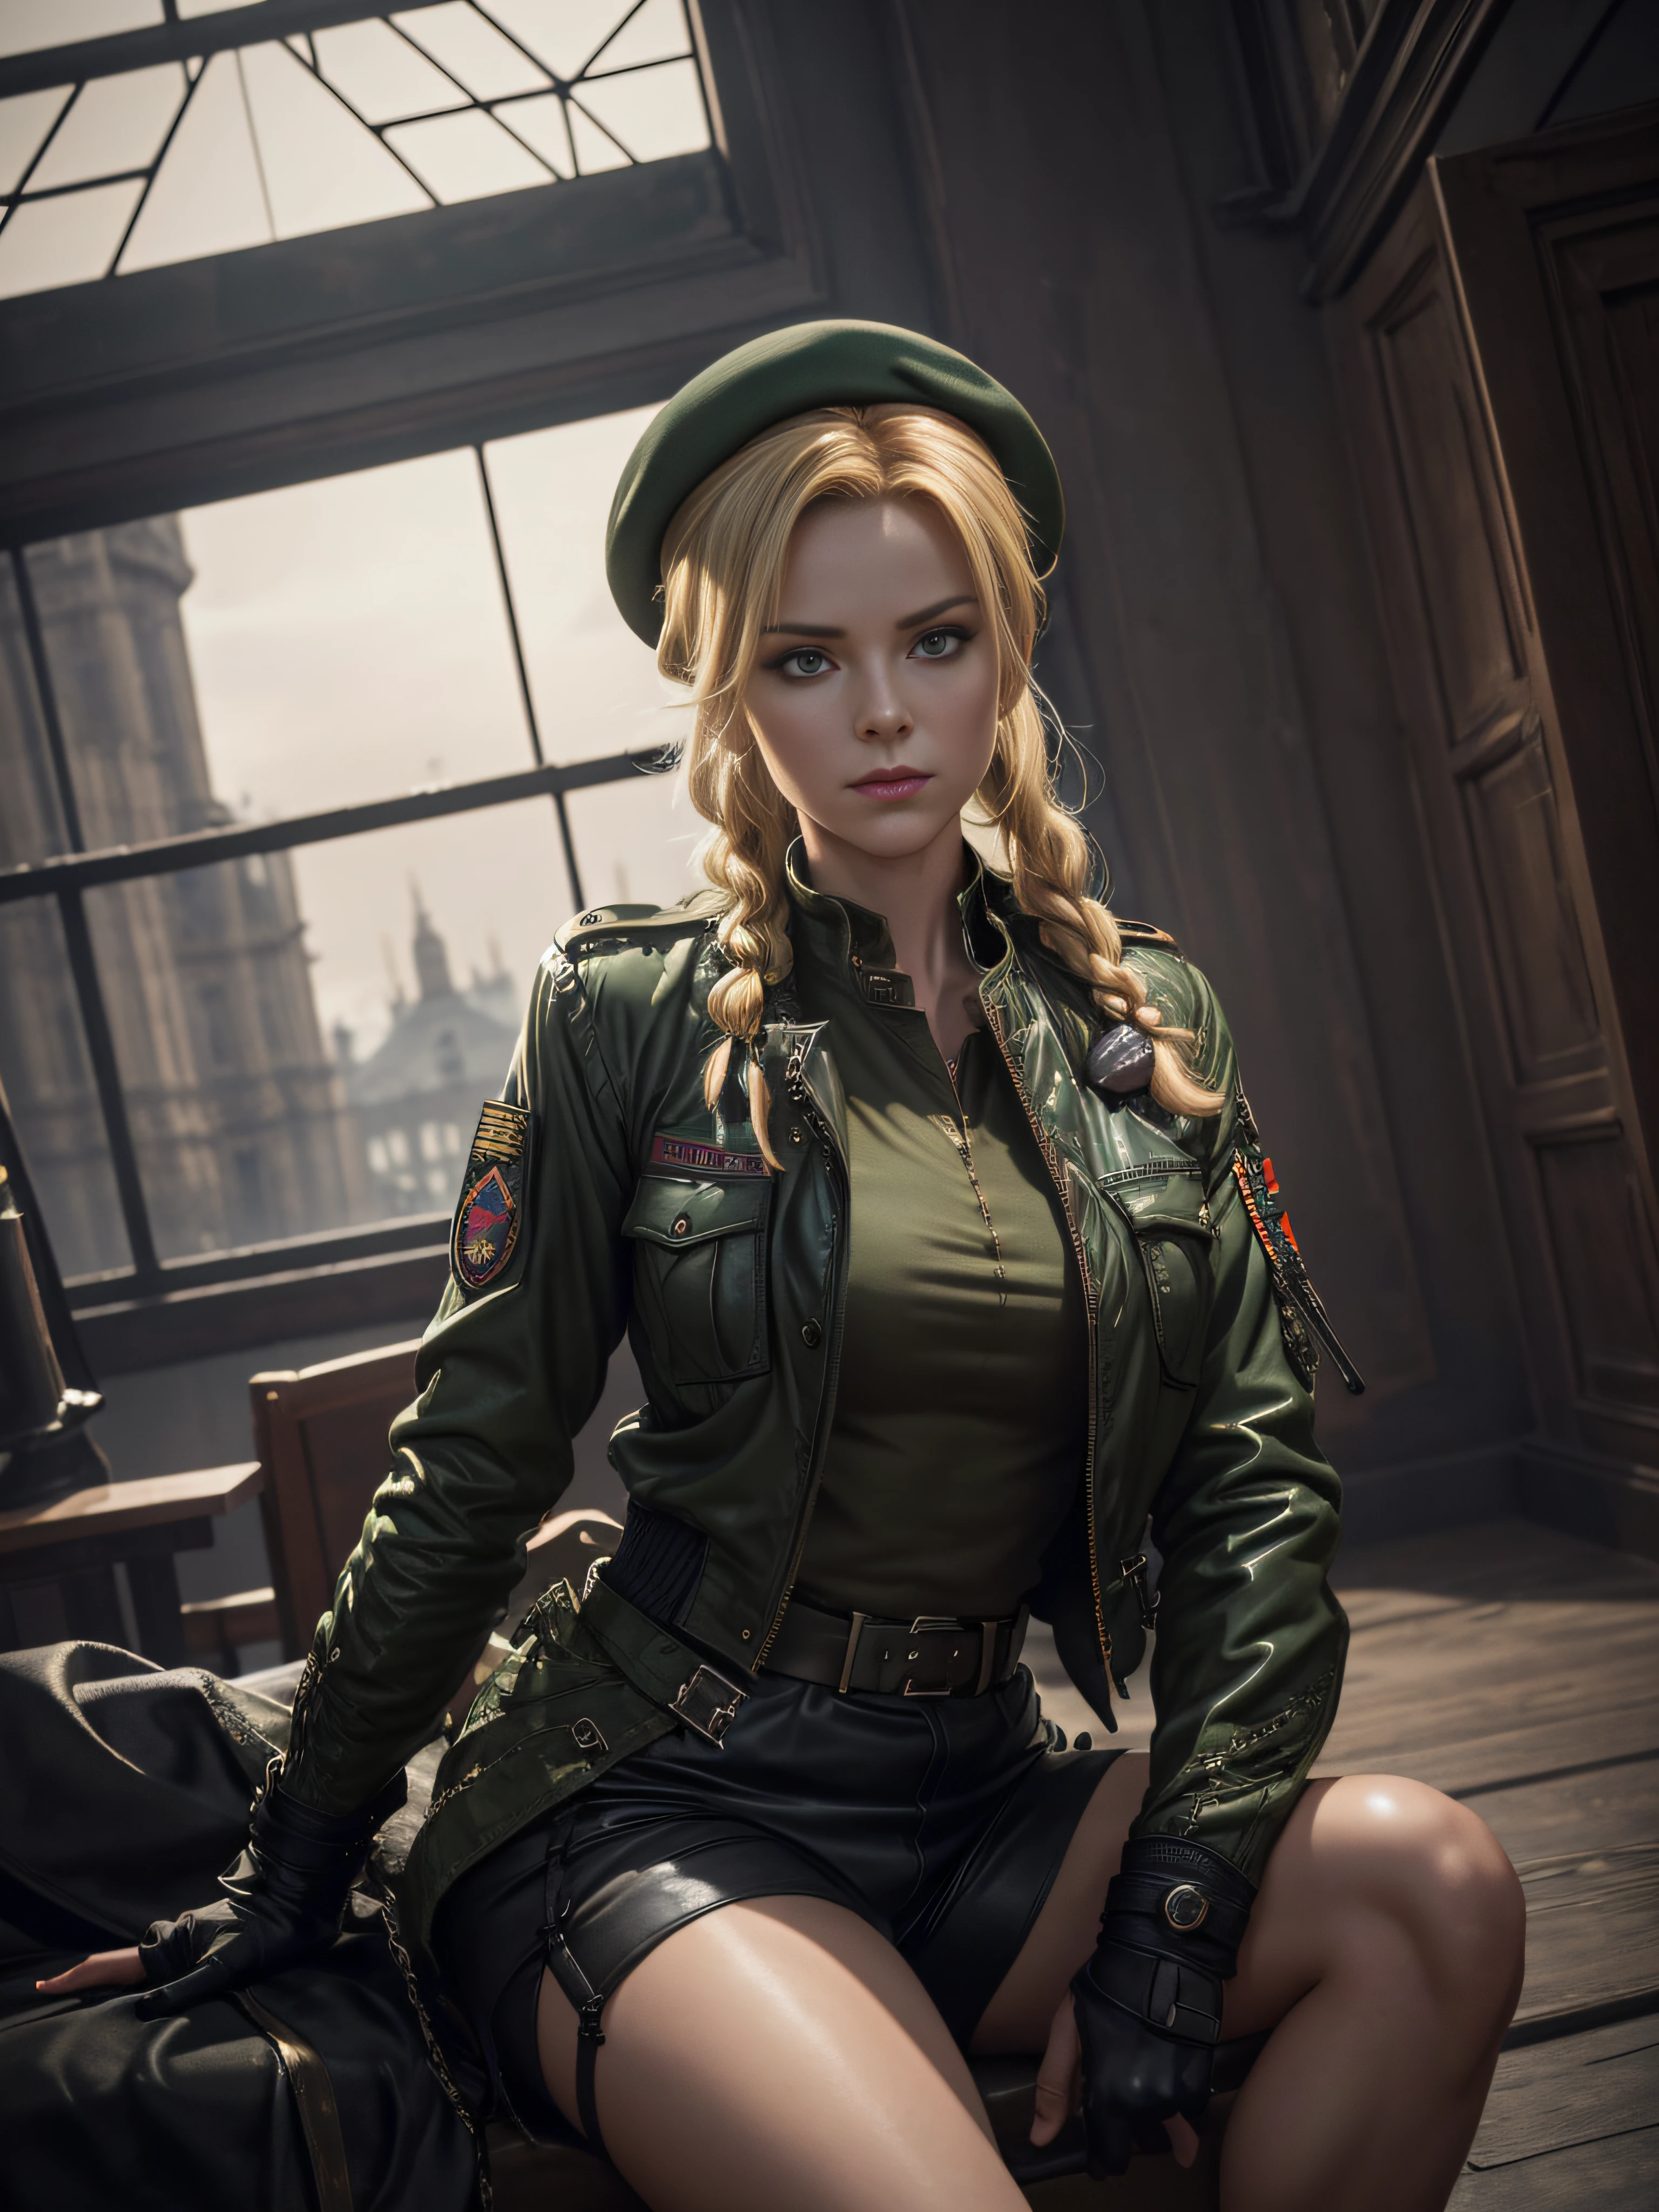 "(exquisitely detailed CG unity 8k wallpaper, masterpiece-quality with stunning realism), (best illumination, best shadow), (best quality), (elegant and demonic style:1.2), Arti modern anime. angled view, heroic pose, closeup full body portrait of stunningly beautiful cammy from street fighter, Masterpiece, best quality, highres, mature Cammy white, twin braids, long hair, blonde hair, antenna hair, beret, (red headwear:1), blue eyes, scar on cheek, green military croptop, green military shorts, red gloves, fingerless gloves, camouflage, (fully clothed:1), abs, depth of field blur effect, night, full zoom, action portrait, photorealistic. cinematic lighting, highly detailed. best quality, 4k, Better hand, perfect anatomy, leaning forward, foreshortening effects, coy flirty sexy expression, foreshortening effect, (piercing eyes:0.8), surrounded by an ominous and dark atmosphere, accentuated by dramatic and striking lighting, imbued with a sense of surreal fantasy". wearing laced military boots:1.5), (resting inside MI6 headquarters:1) (wearing a British Military jacket:1.5) (mature:0.5) (indoors:1.5)